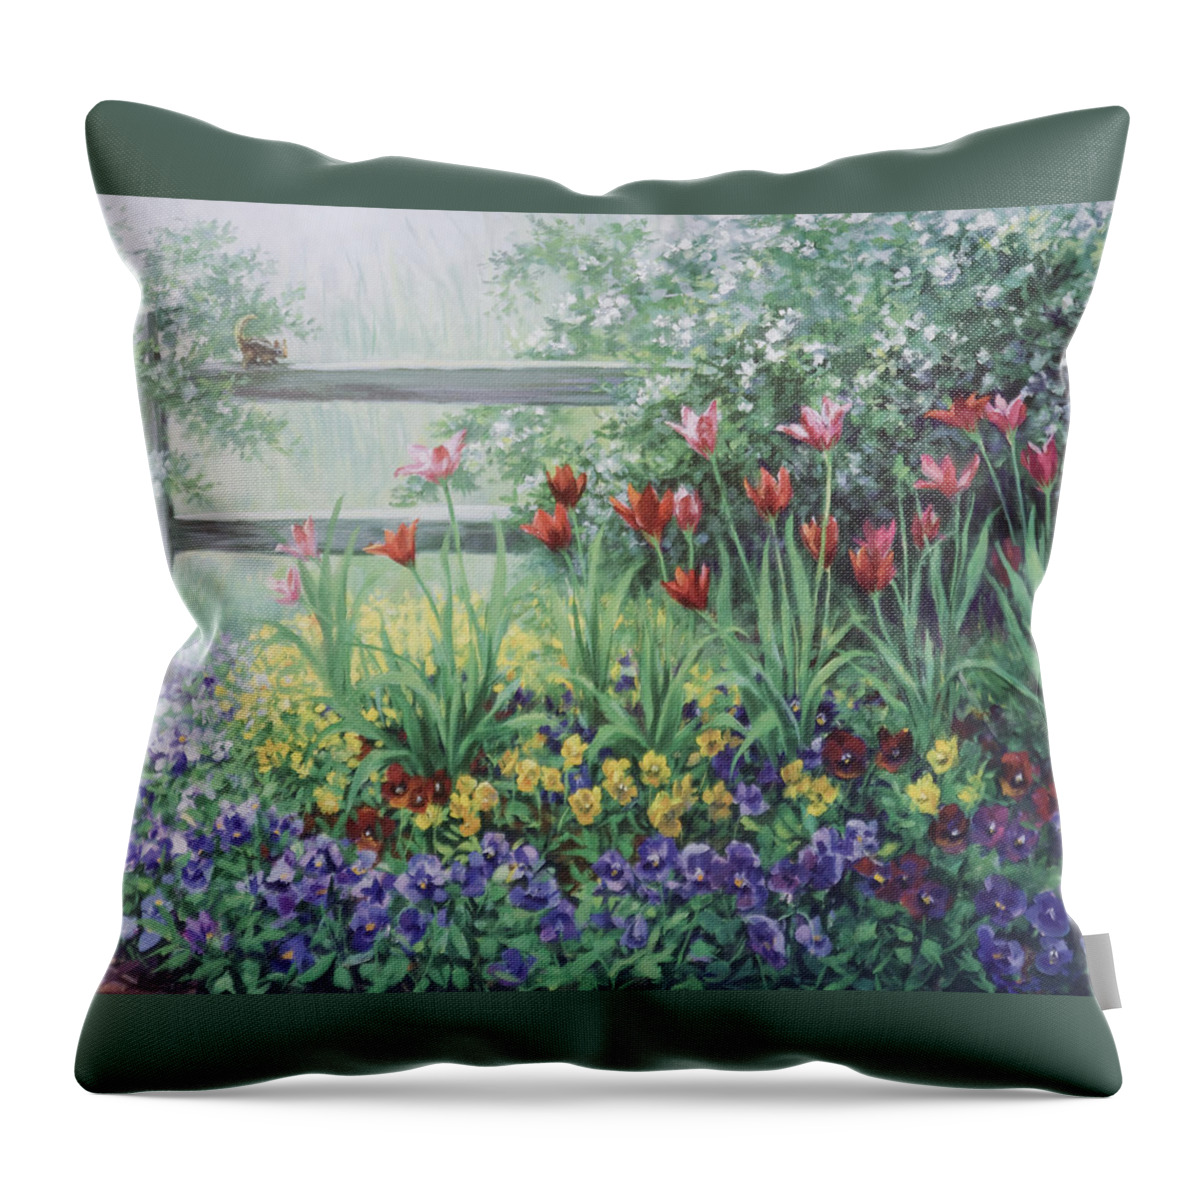 Garden Throw Pillow featuring the painting Garden Tulips by Laurie Snow Hein